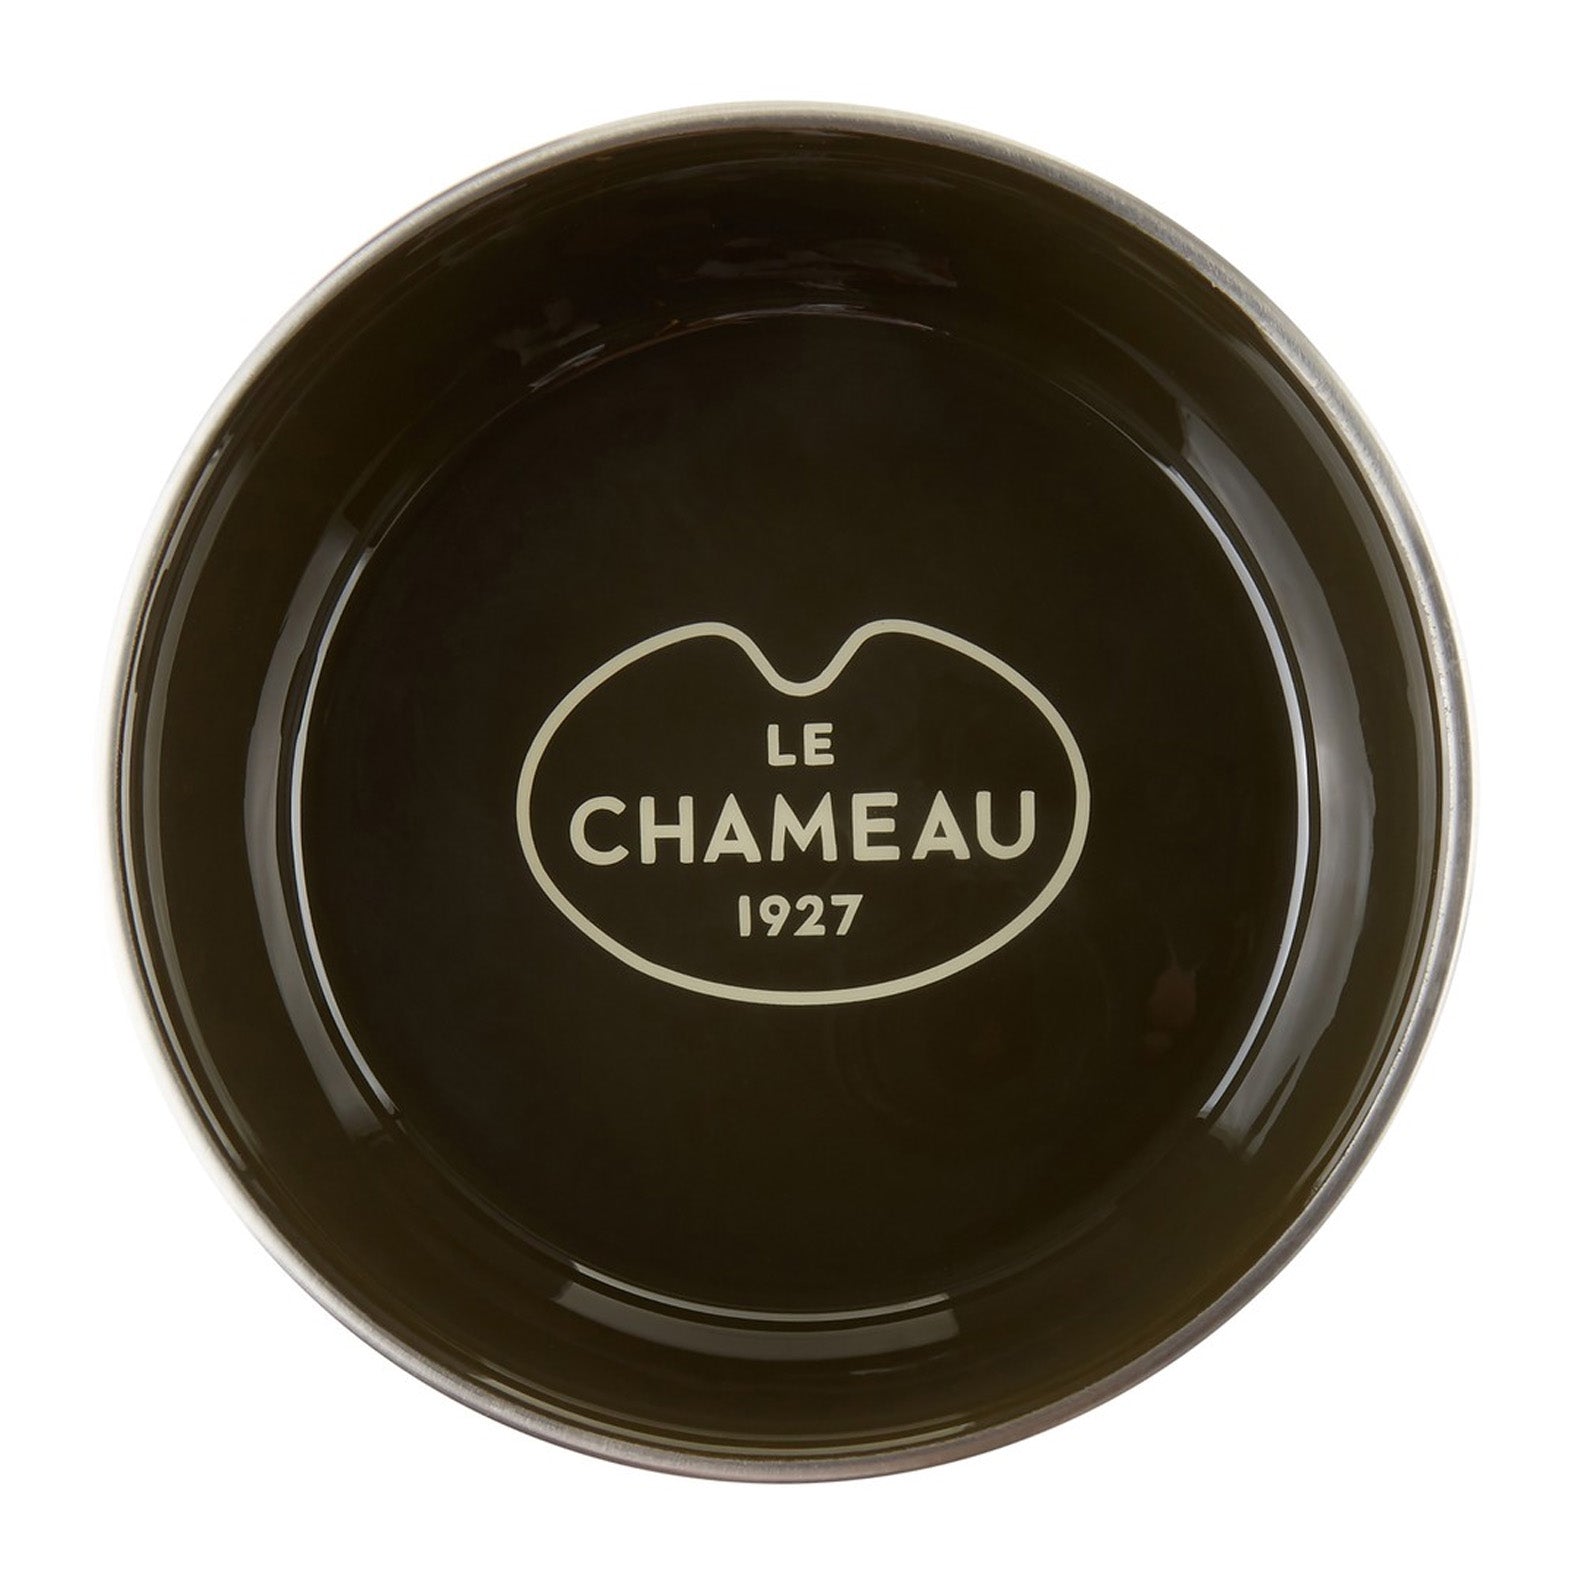 Le-Chameau-Large-Stainless-Steel-Dog-Bowl